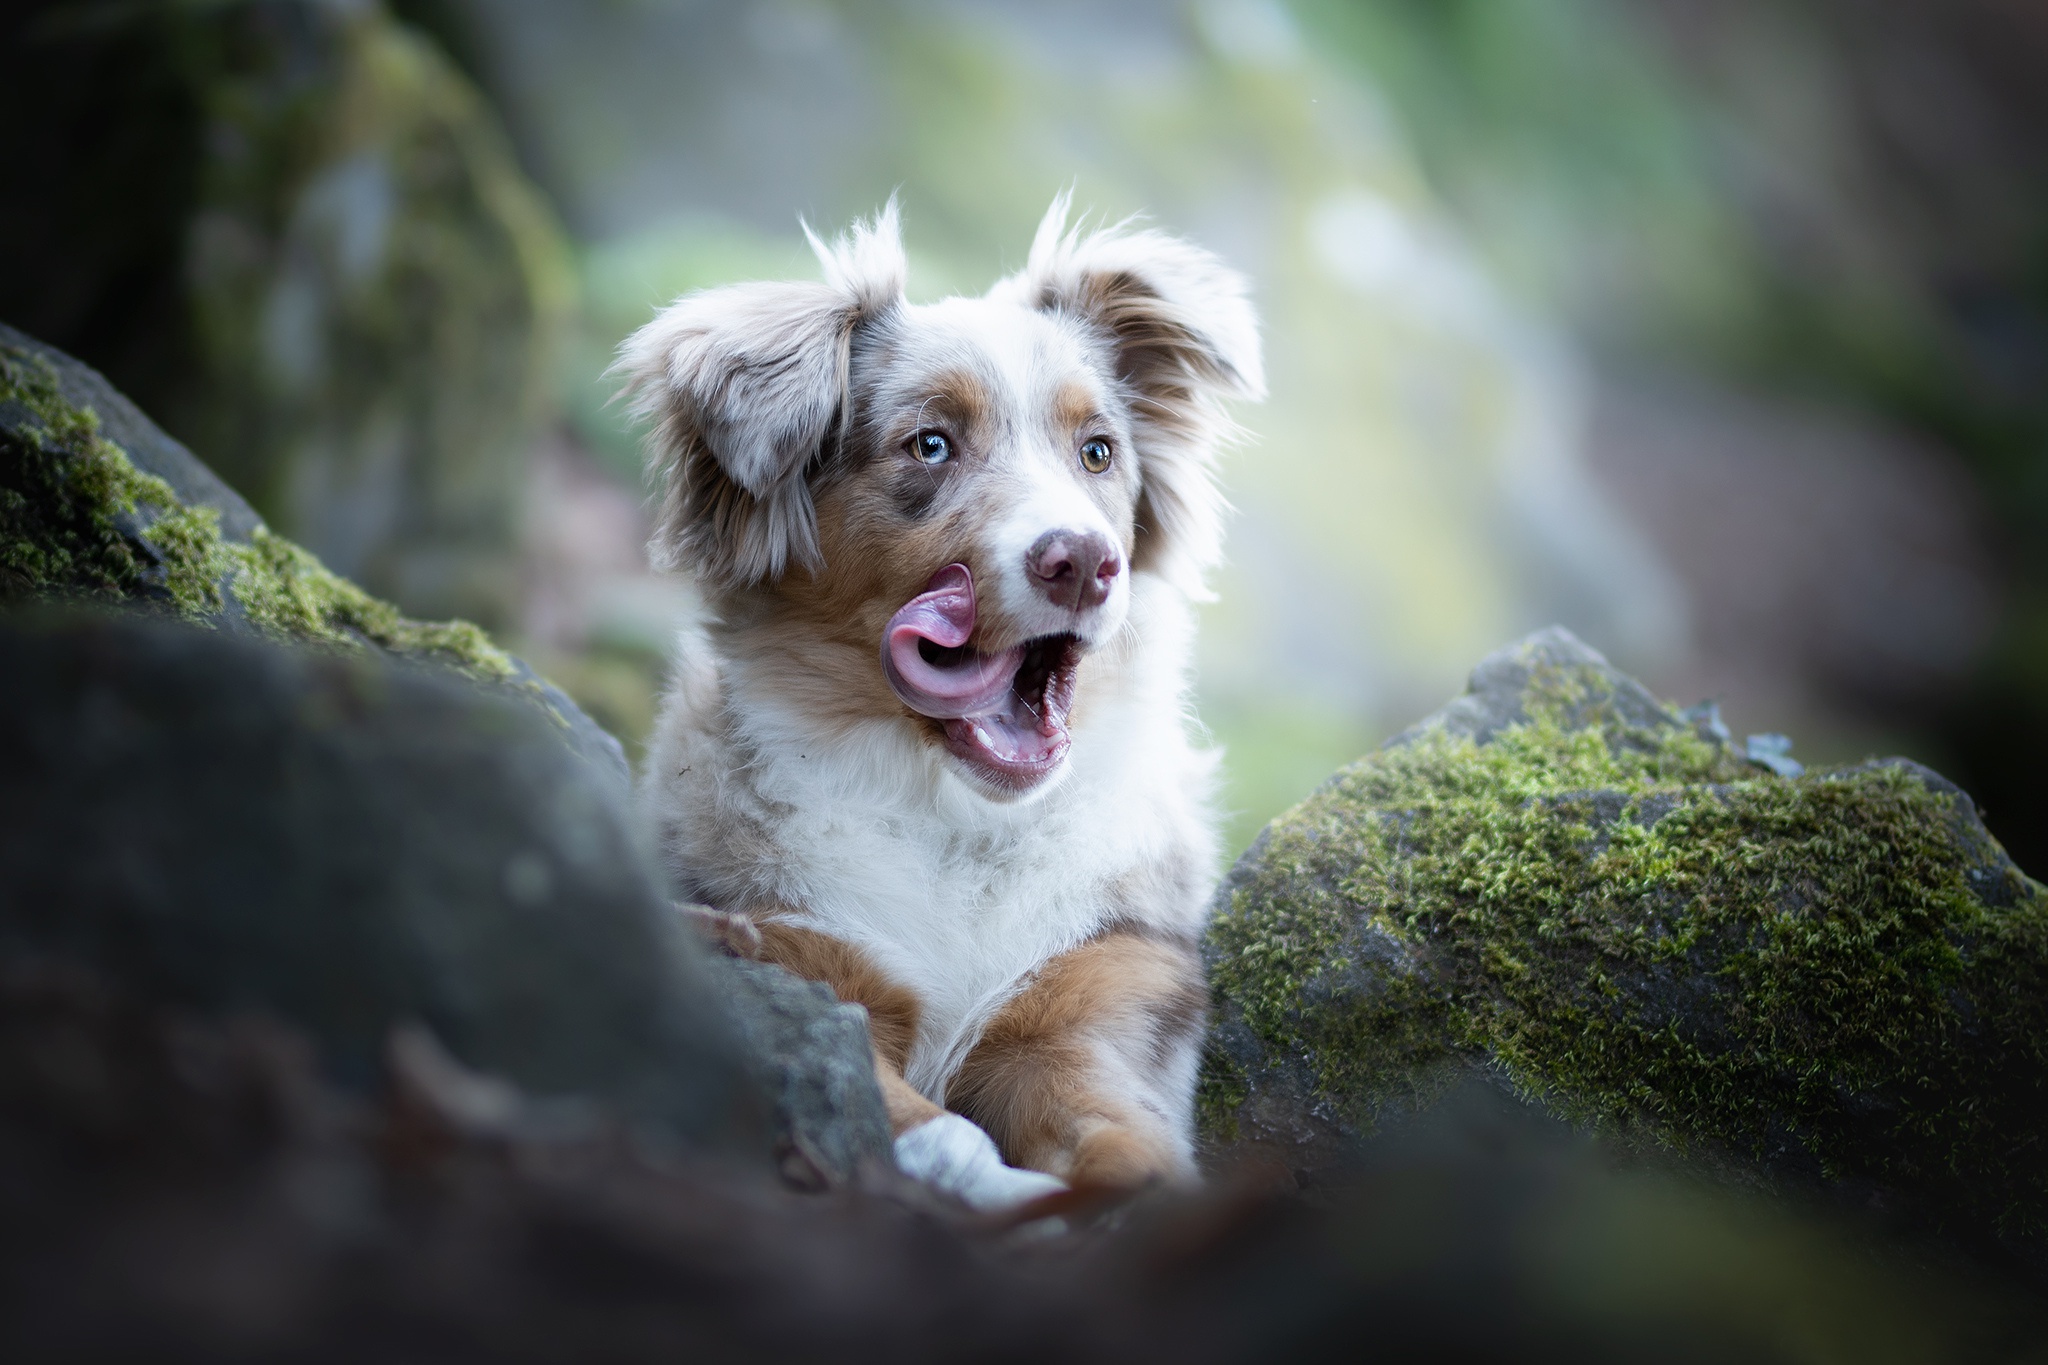 General 2048x1365 outdoors dog tongue out animals mammals